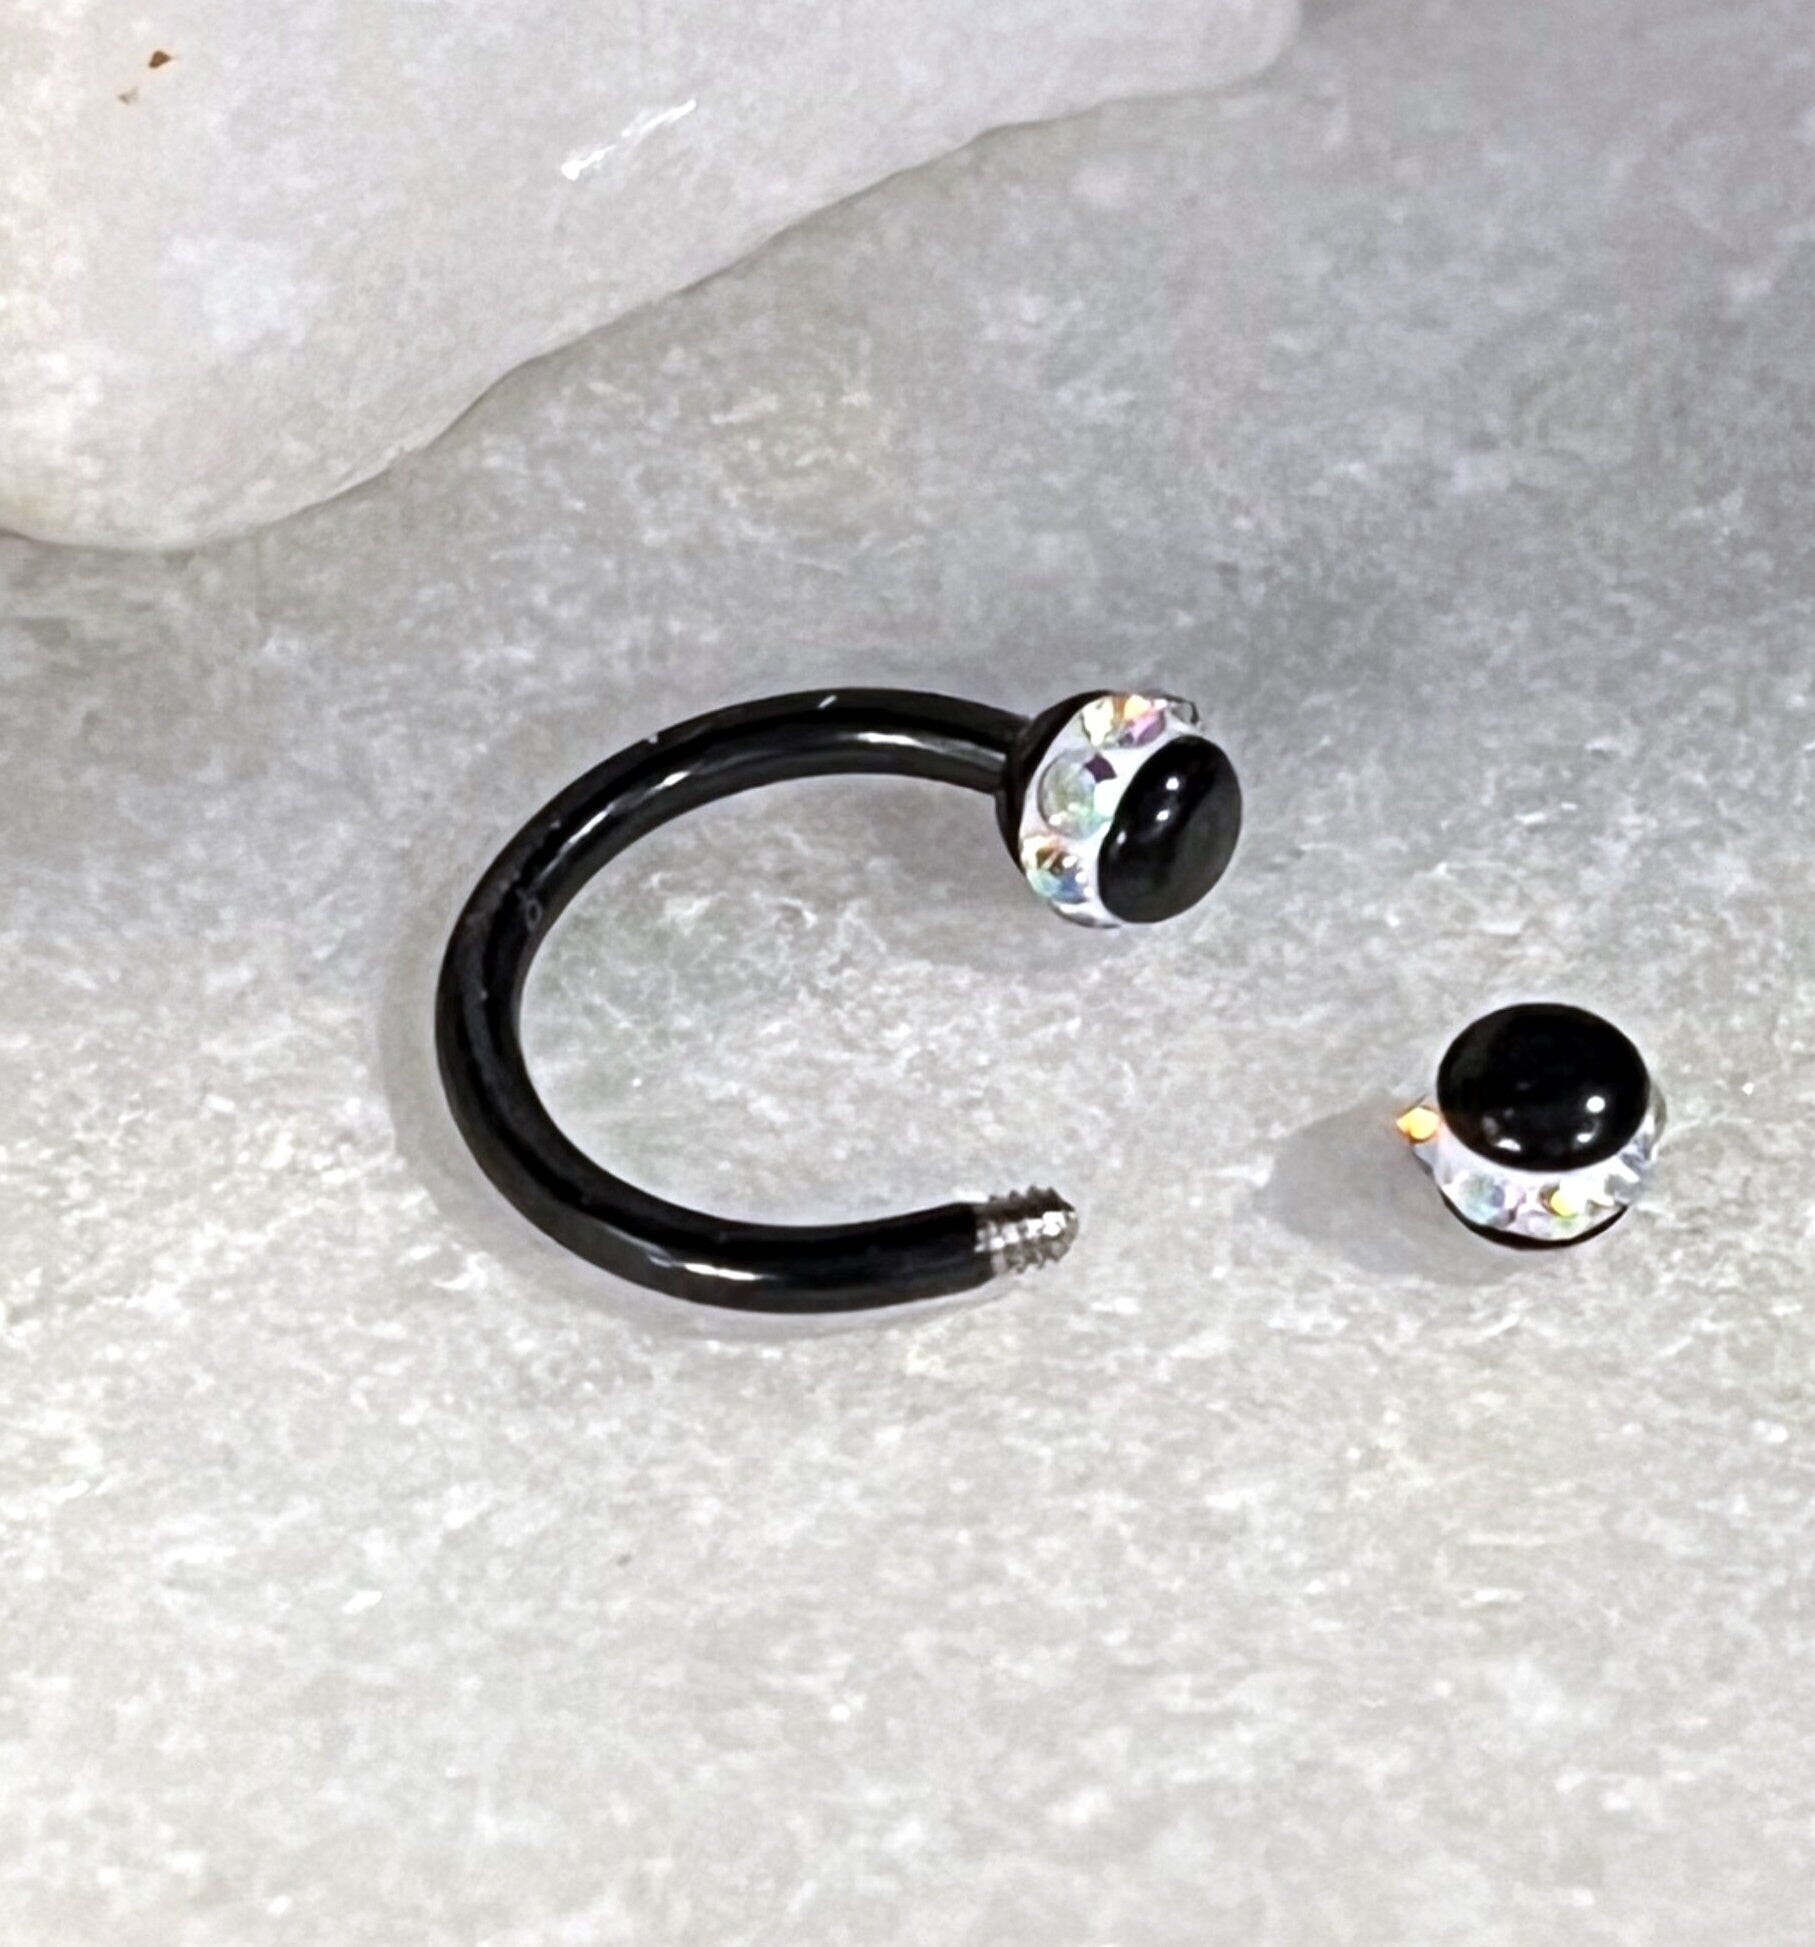 1 Piece Beautiful Crystal Paved Black Circular Horseshoe Septum Ring - 16g, 8mm - Aurora Borealis, Clear, Pink, Aqua or Red Available!